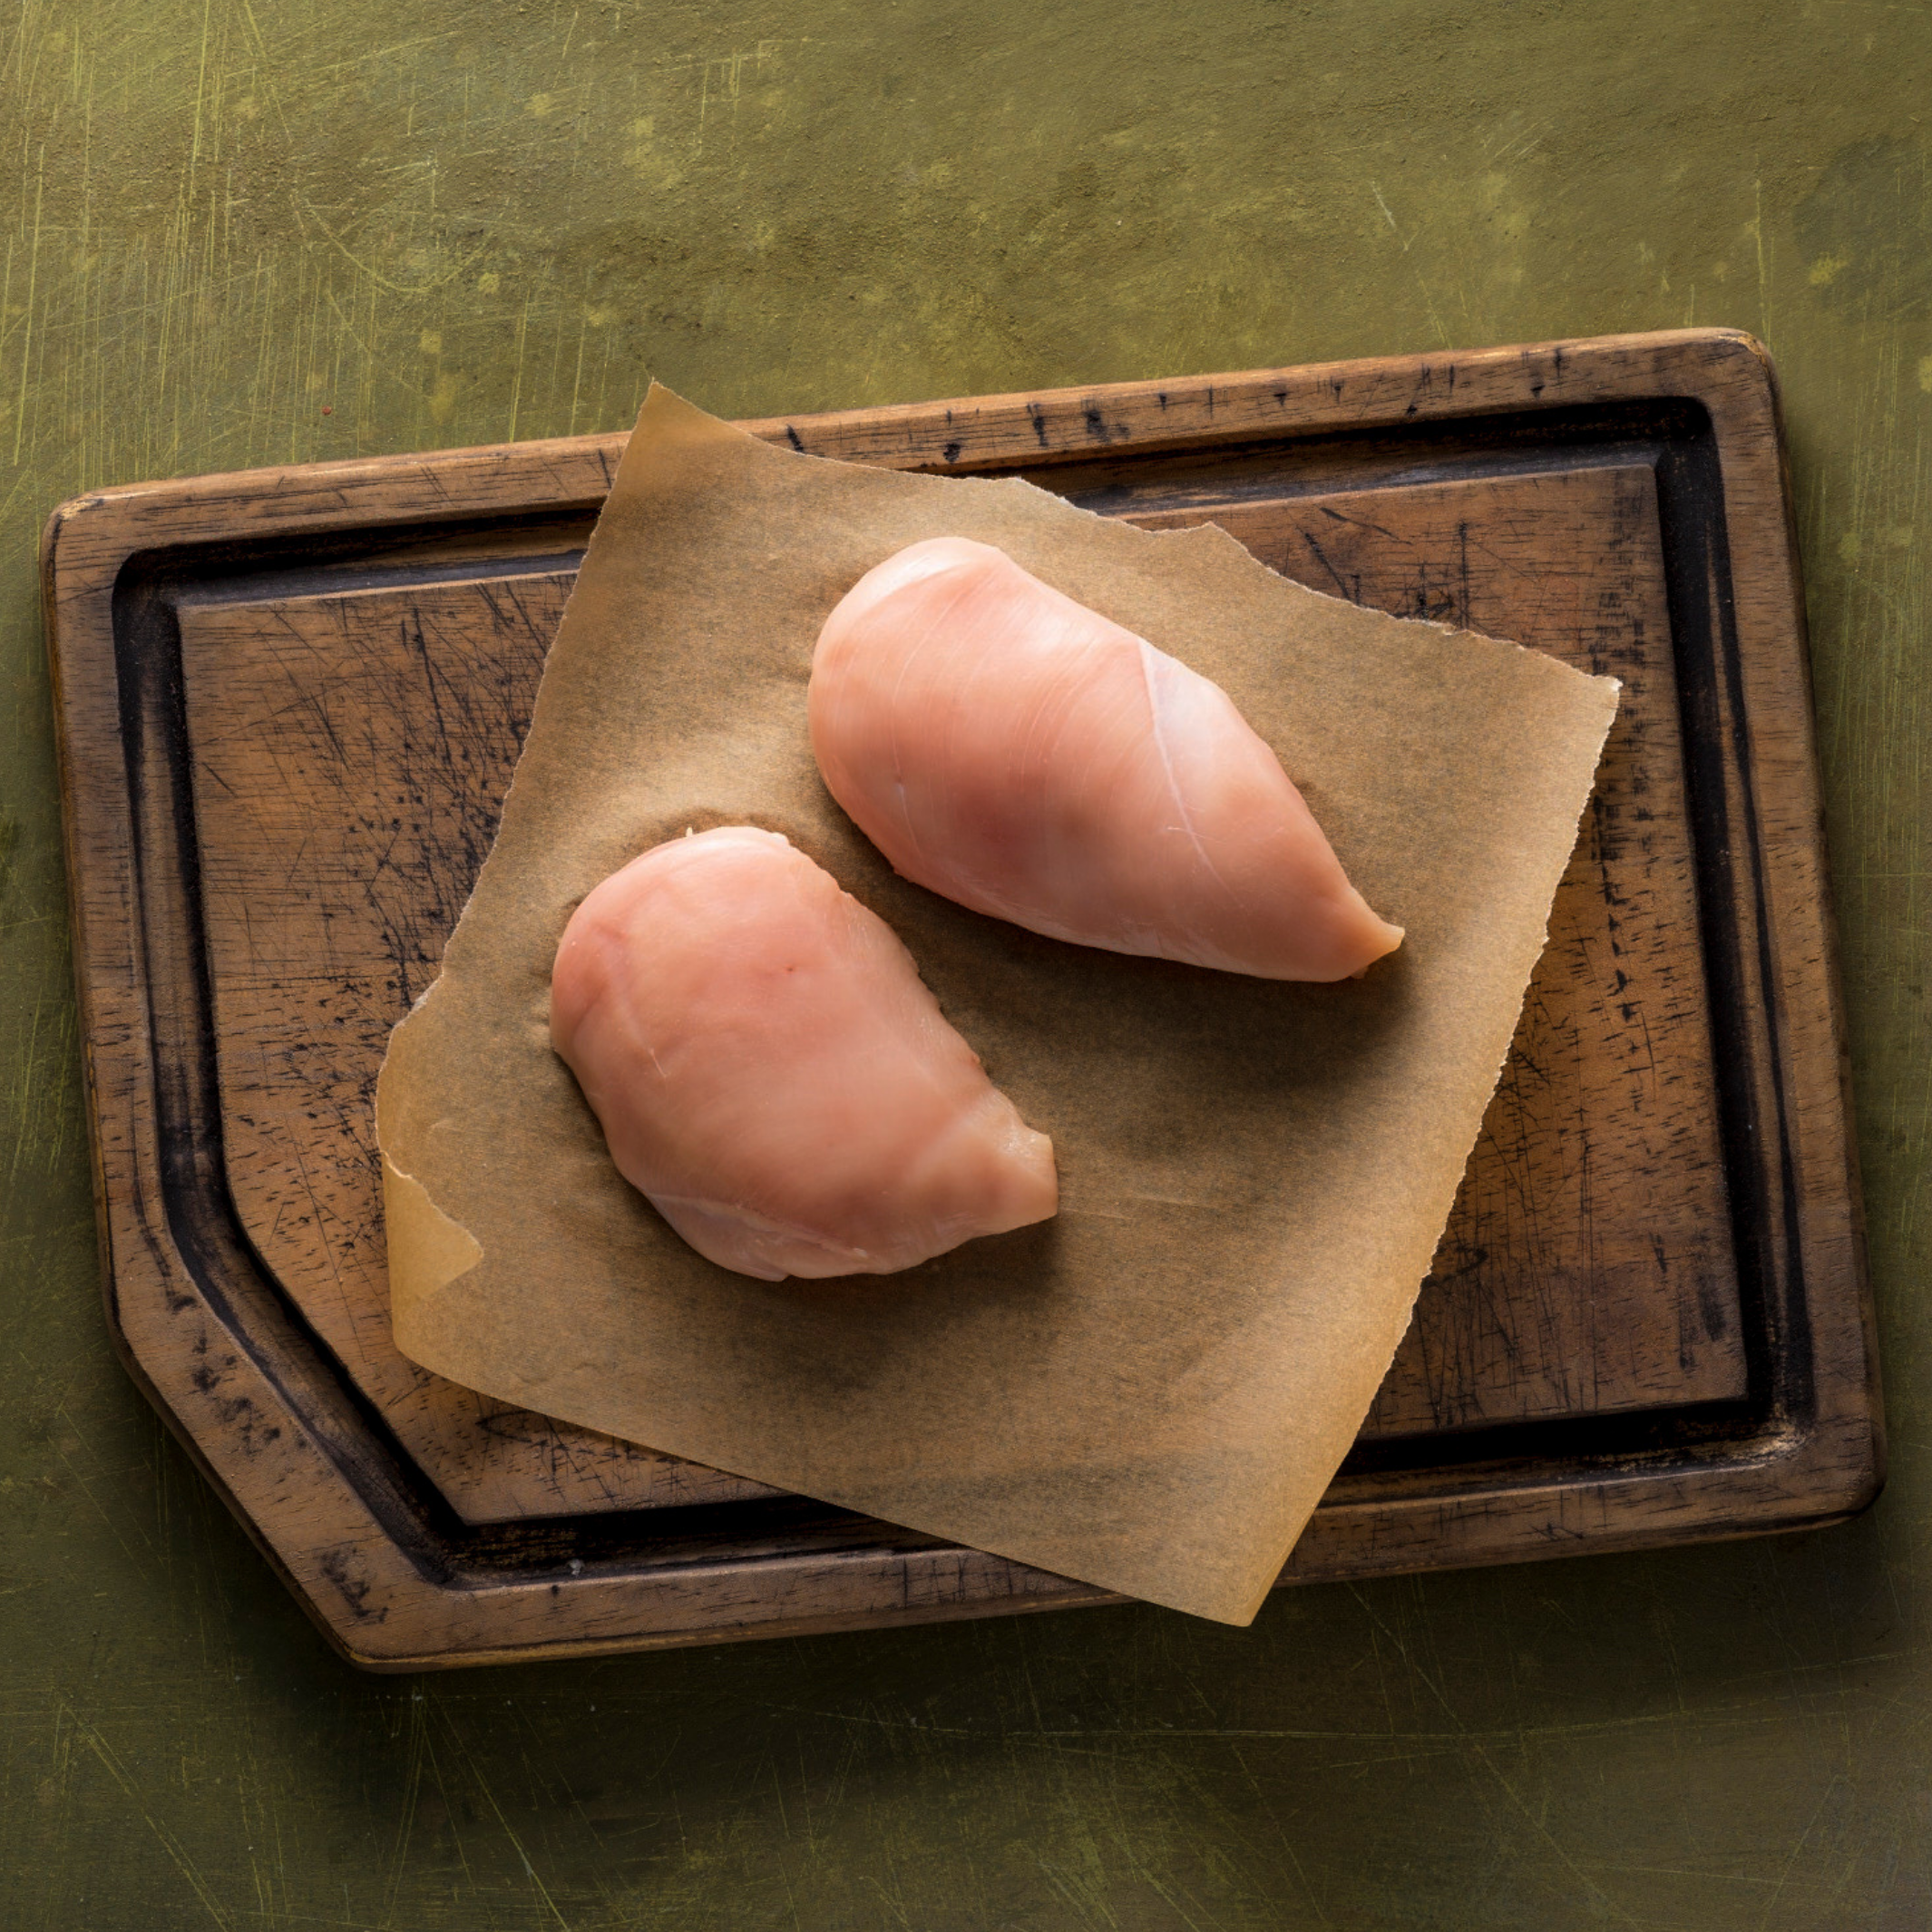 Image of Chicken Breasts